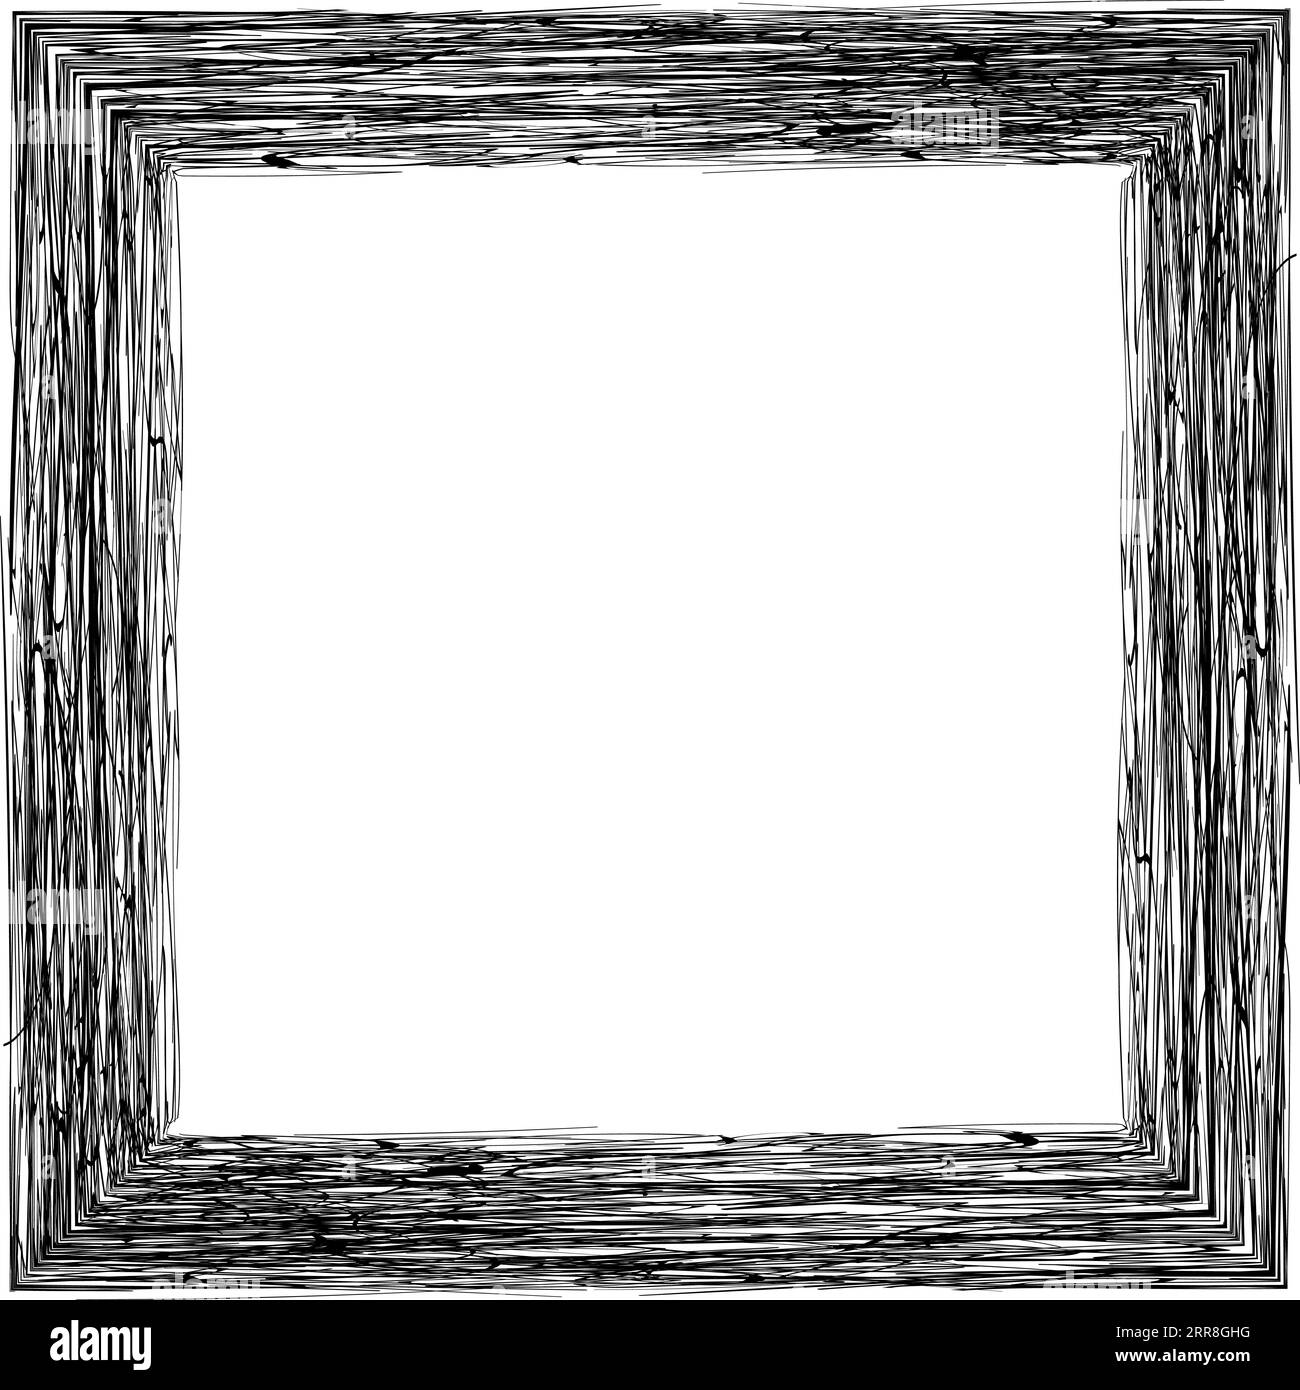 Frame photos pictures pencil shading hand draw frame hatched engraving ...